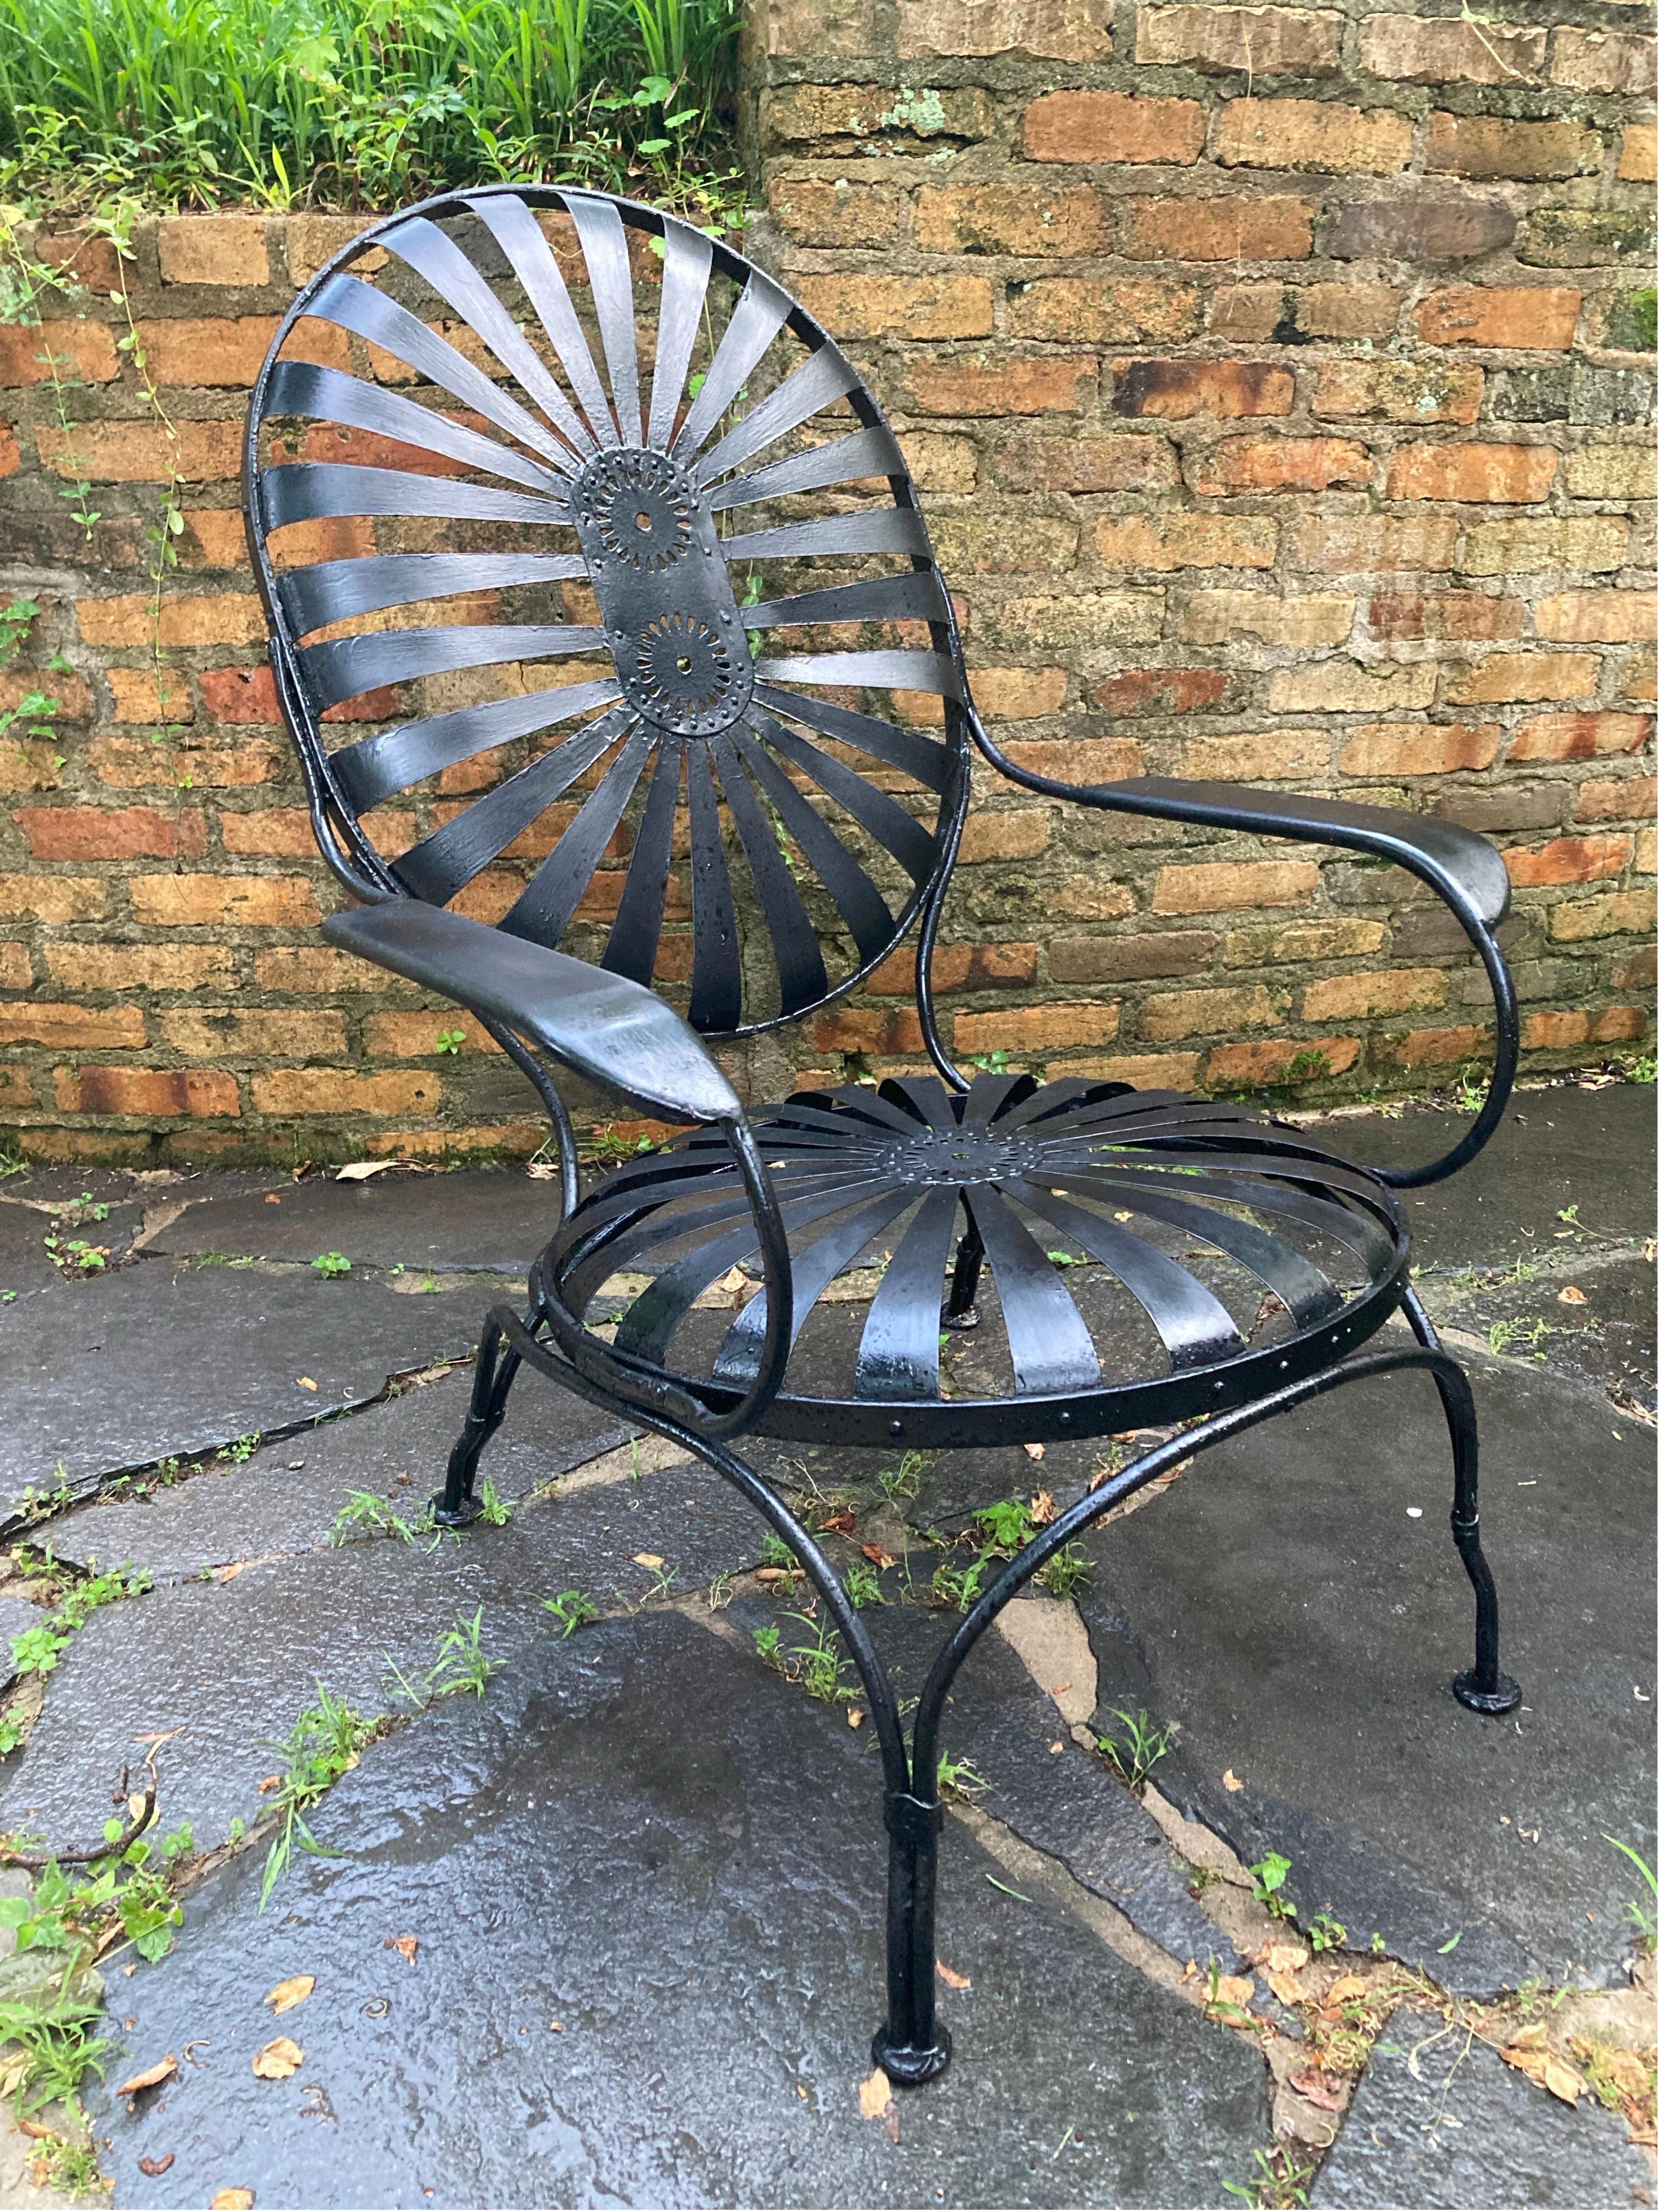 1940’s era iron and spring steel garden lounger, 38 tall. super comfortable. reborn in a black satin finish. i have 3 of these, total. priced individually
no maker’s mark
shipping from athens, ga